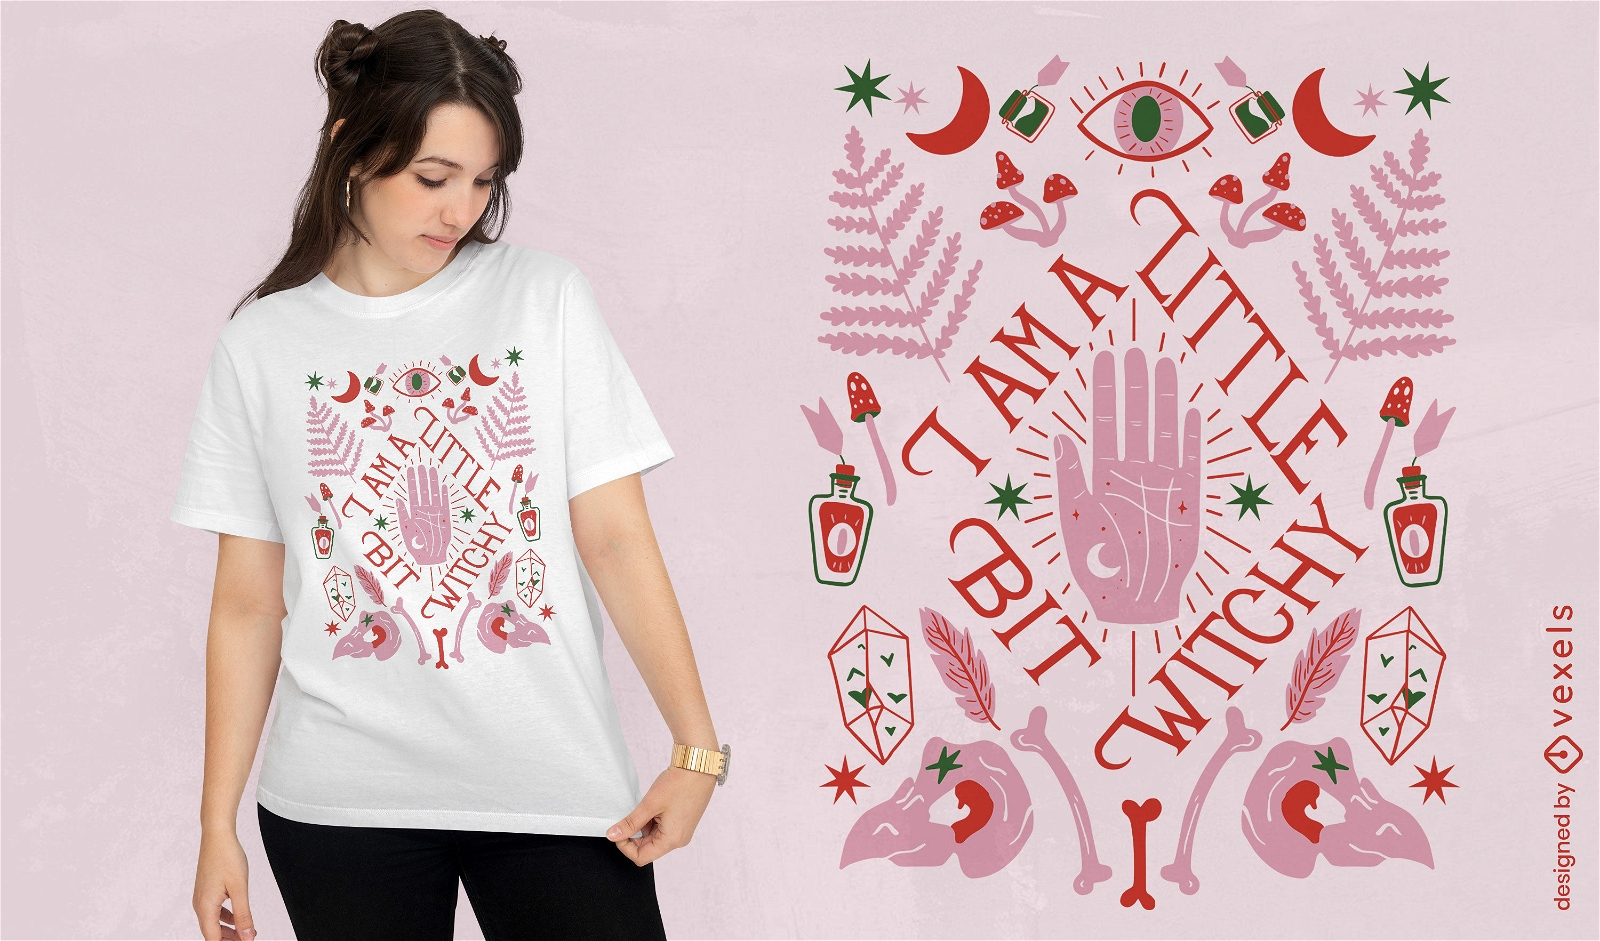 Witchy magic quote t-shirt design